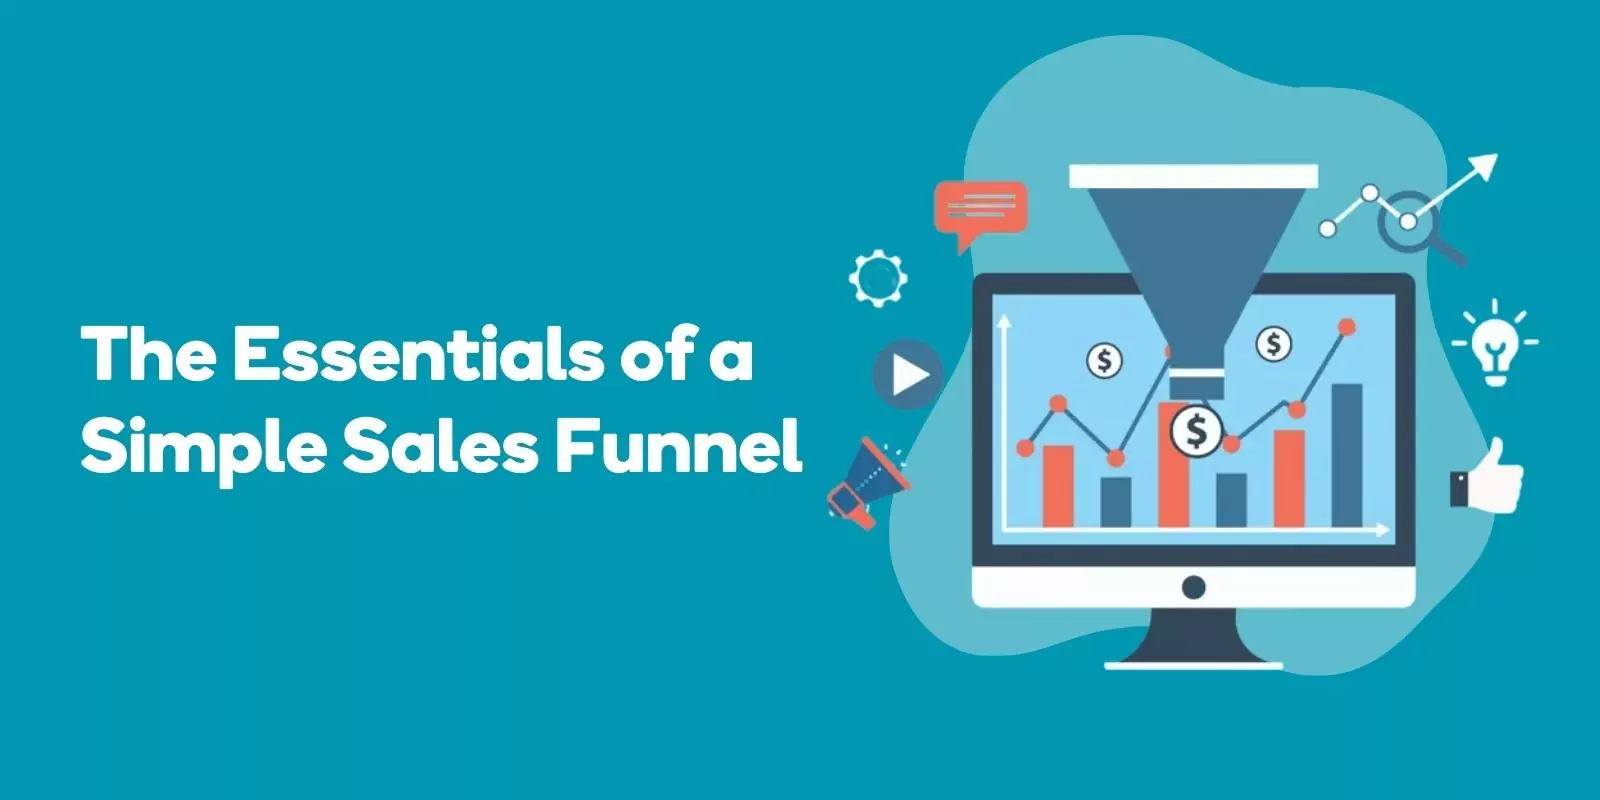 The Essentials of a Simple Sales Funnel